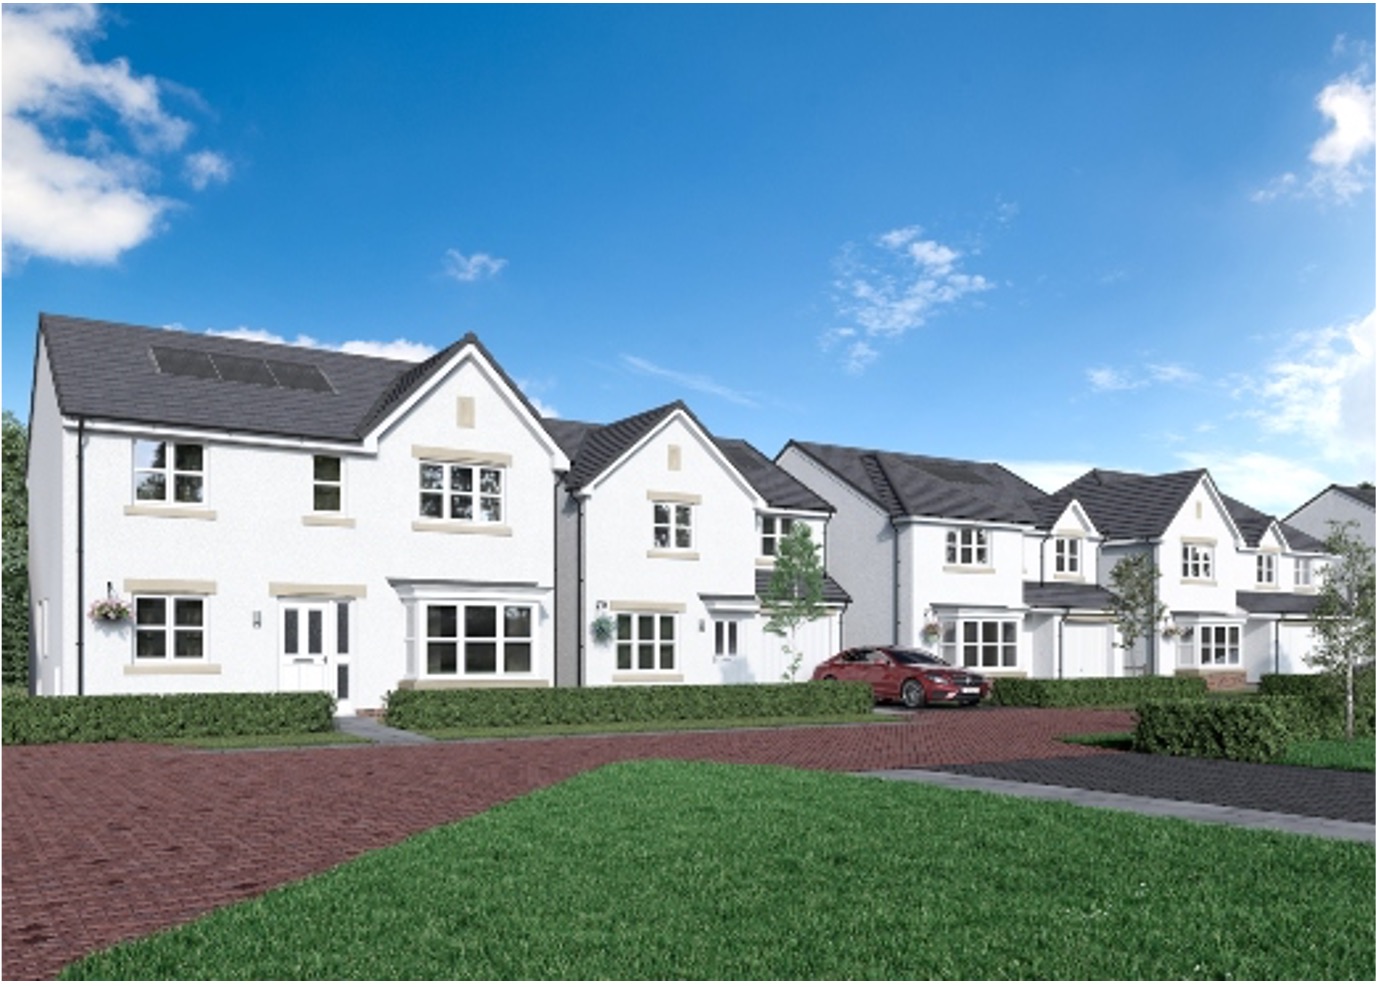 Miller Homes announces 17-acre land purchase at West Craigs in Edinburgh